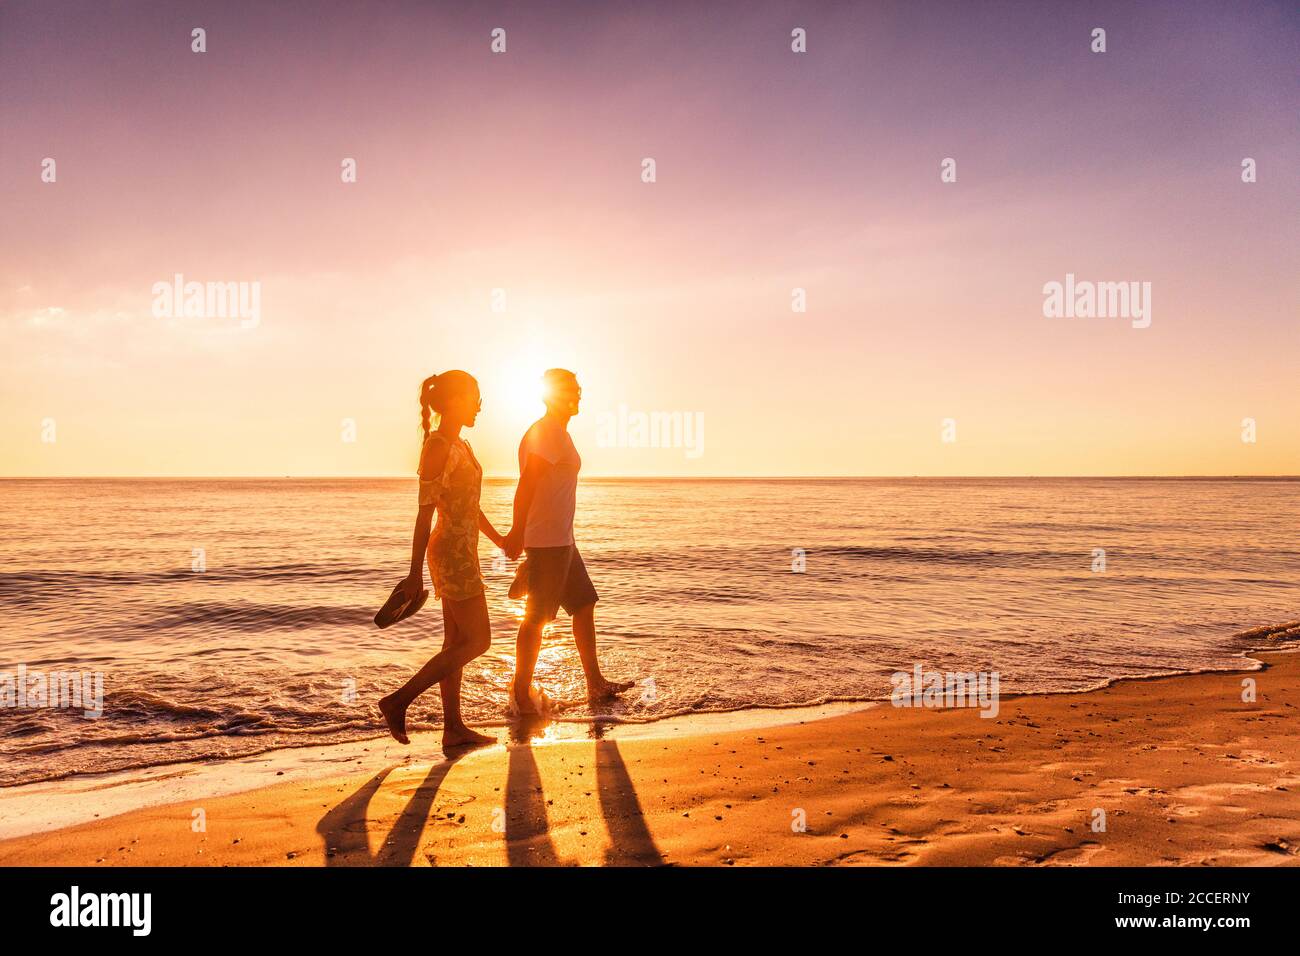 Couple walking on beach at sunset silhouettes - Romantic summer travel holidays in Caribbean destination Stock Photo